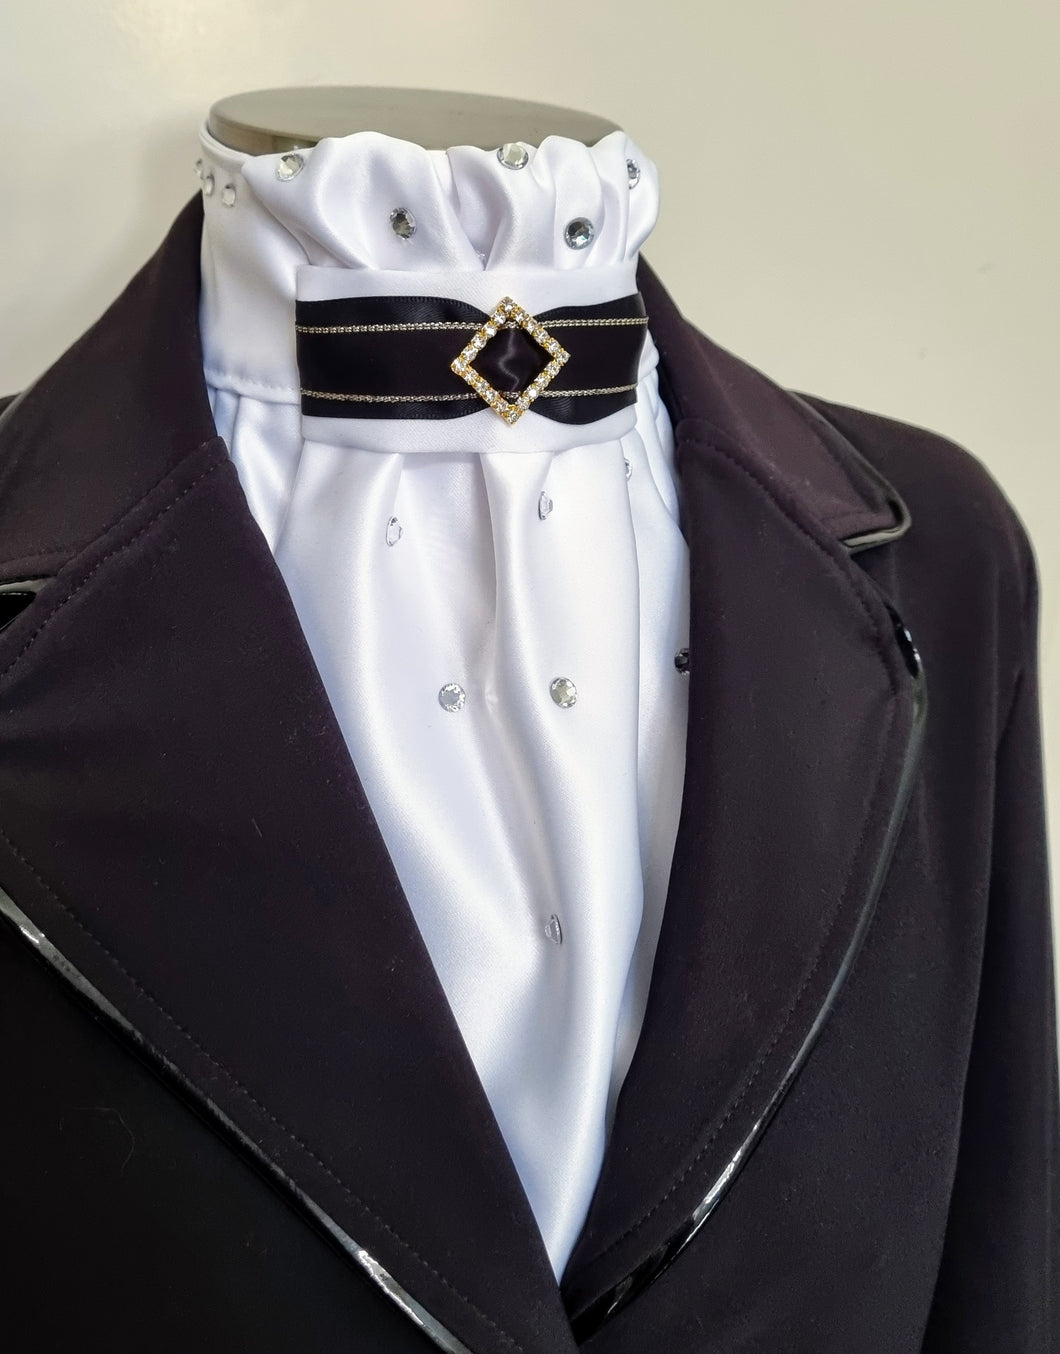 ERA EURO AMORE' STOCK TIE – White satin, black & gold trim with gold crystal diamond and scattered crystals